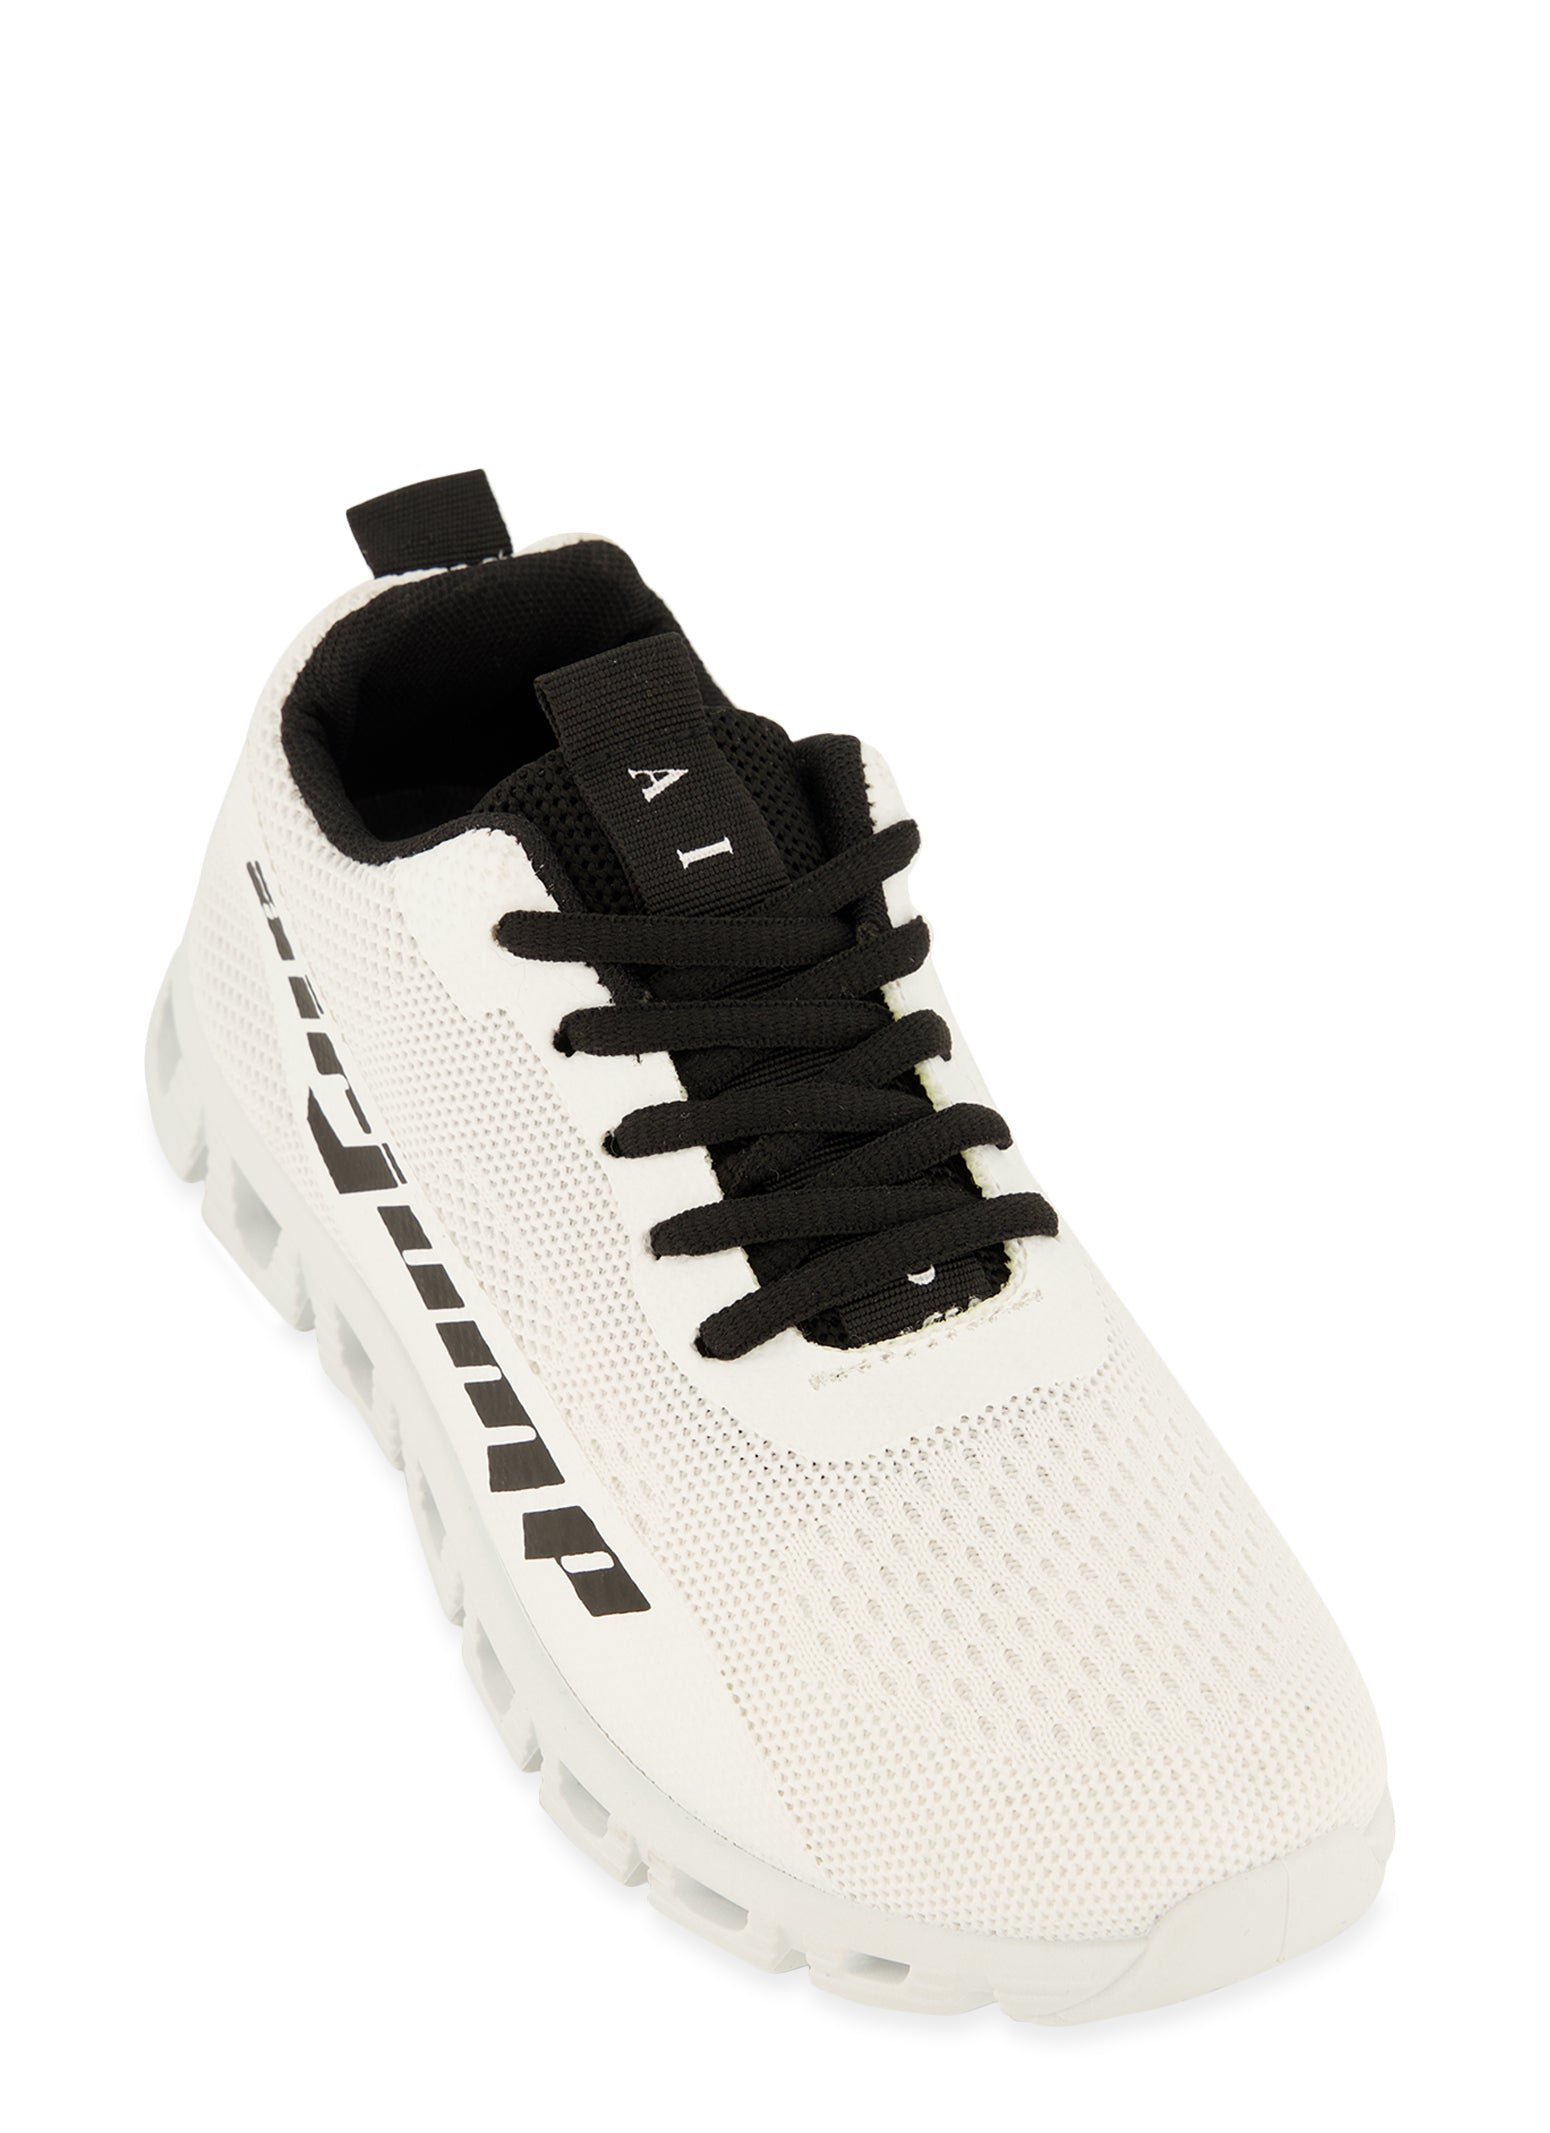 Lace Up Textured Knit Athletic Sneakers